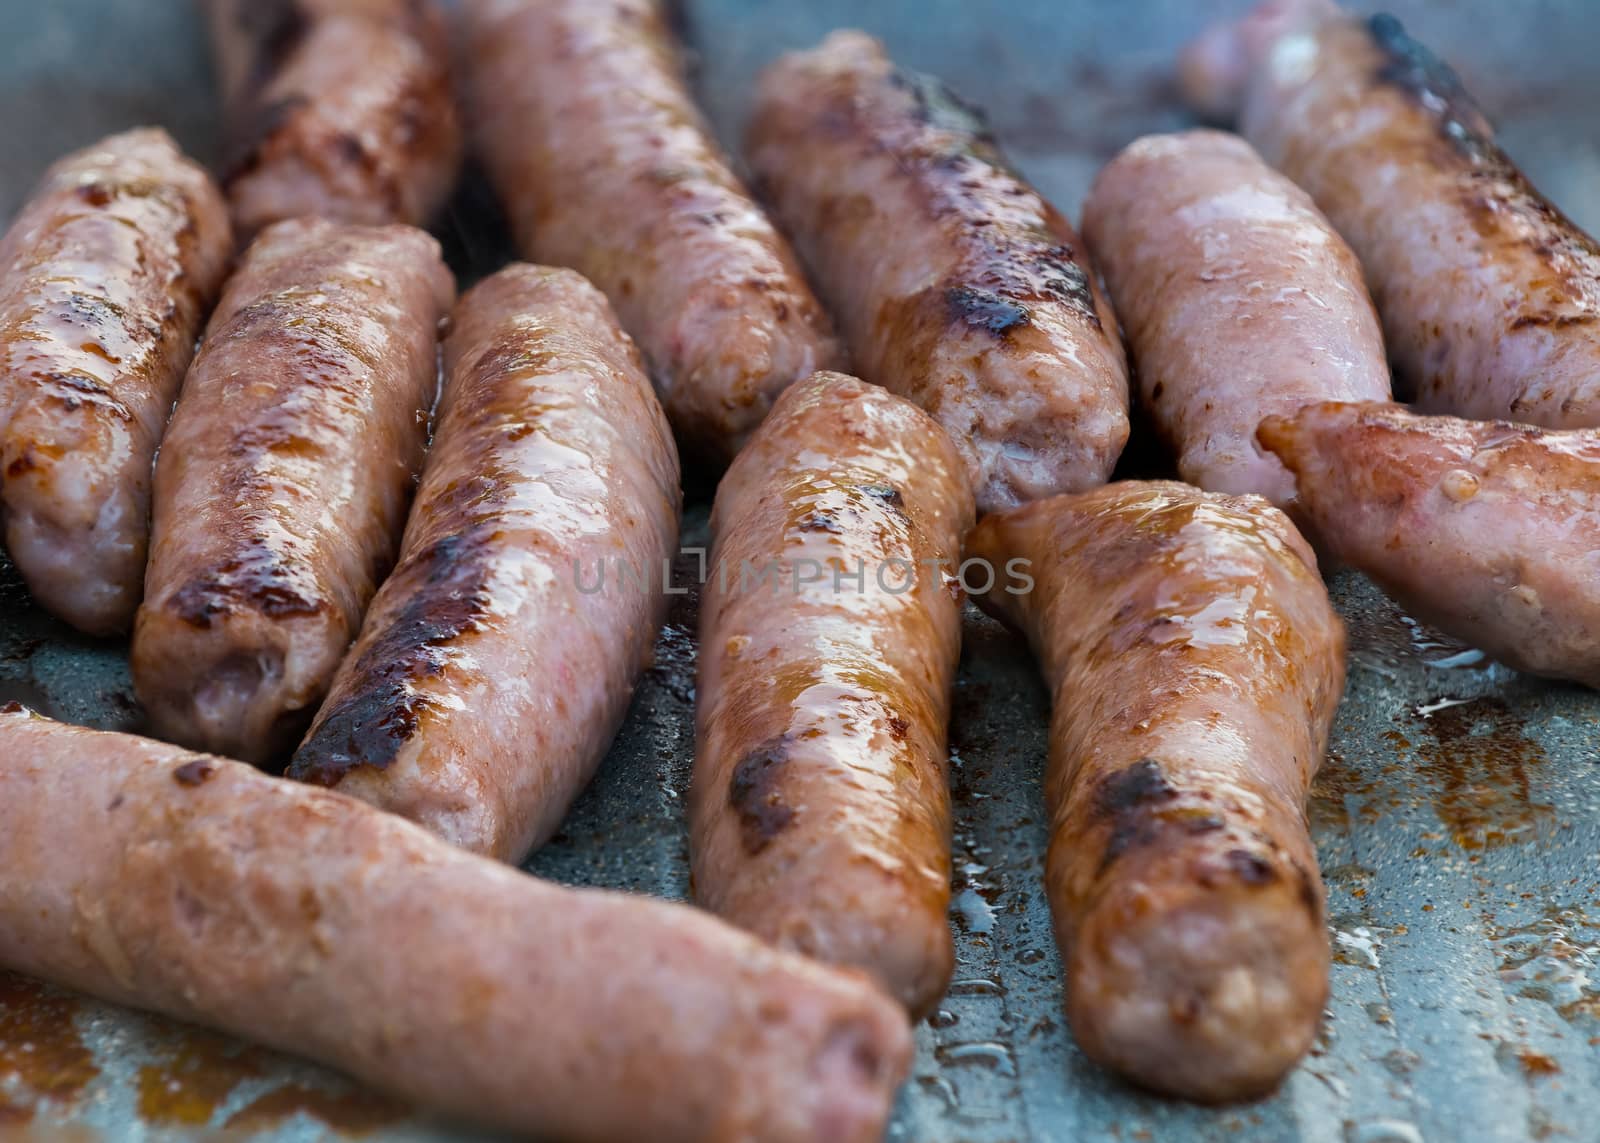 In the picture of the pork sausages are cooked on the grill ( barbecue) while.